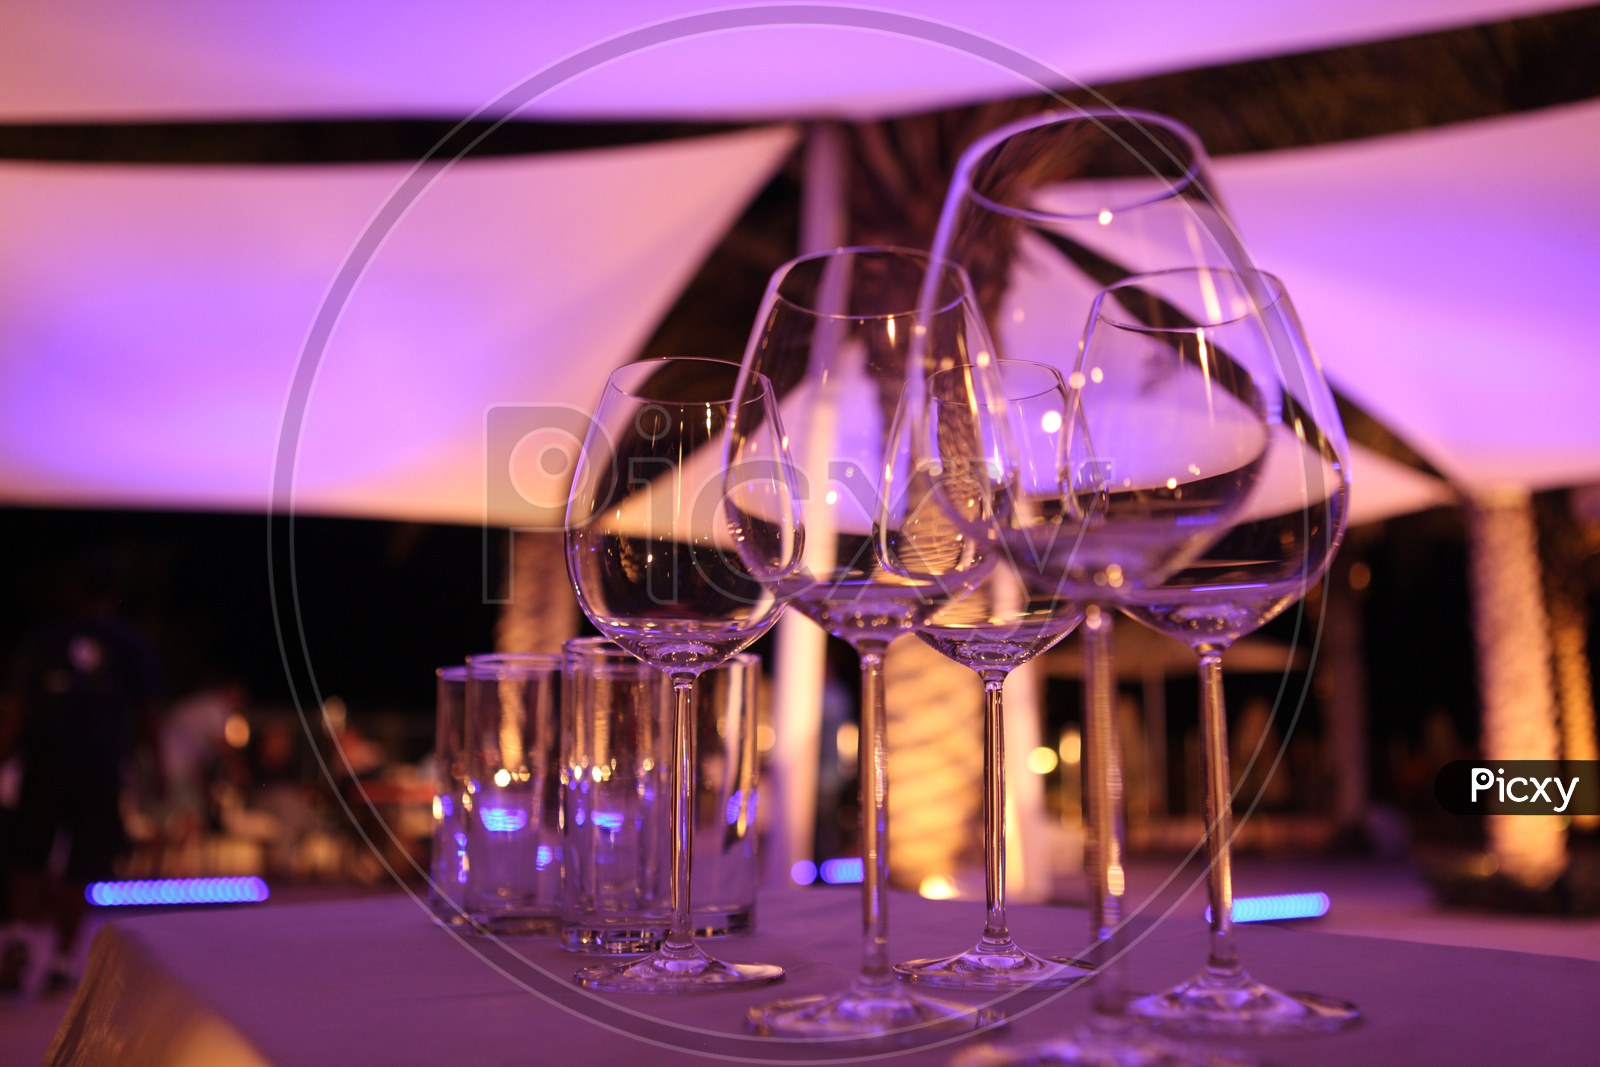 Wine glasses on a table